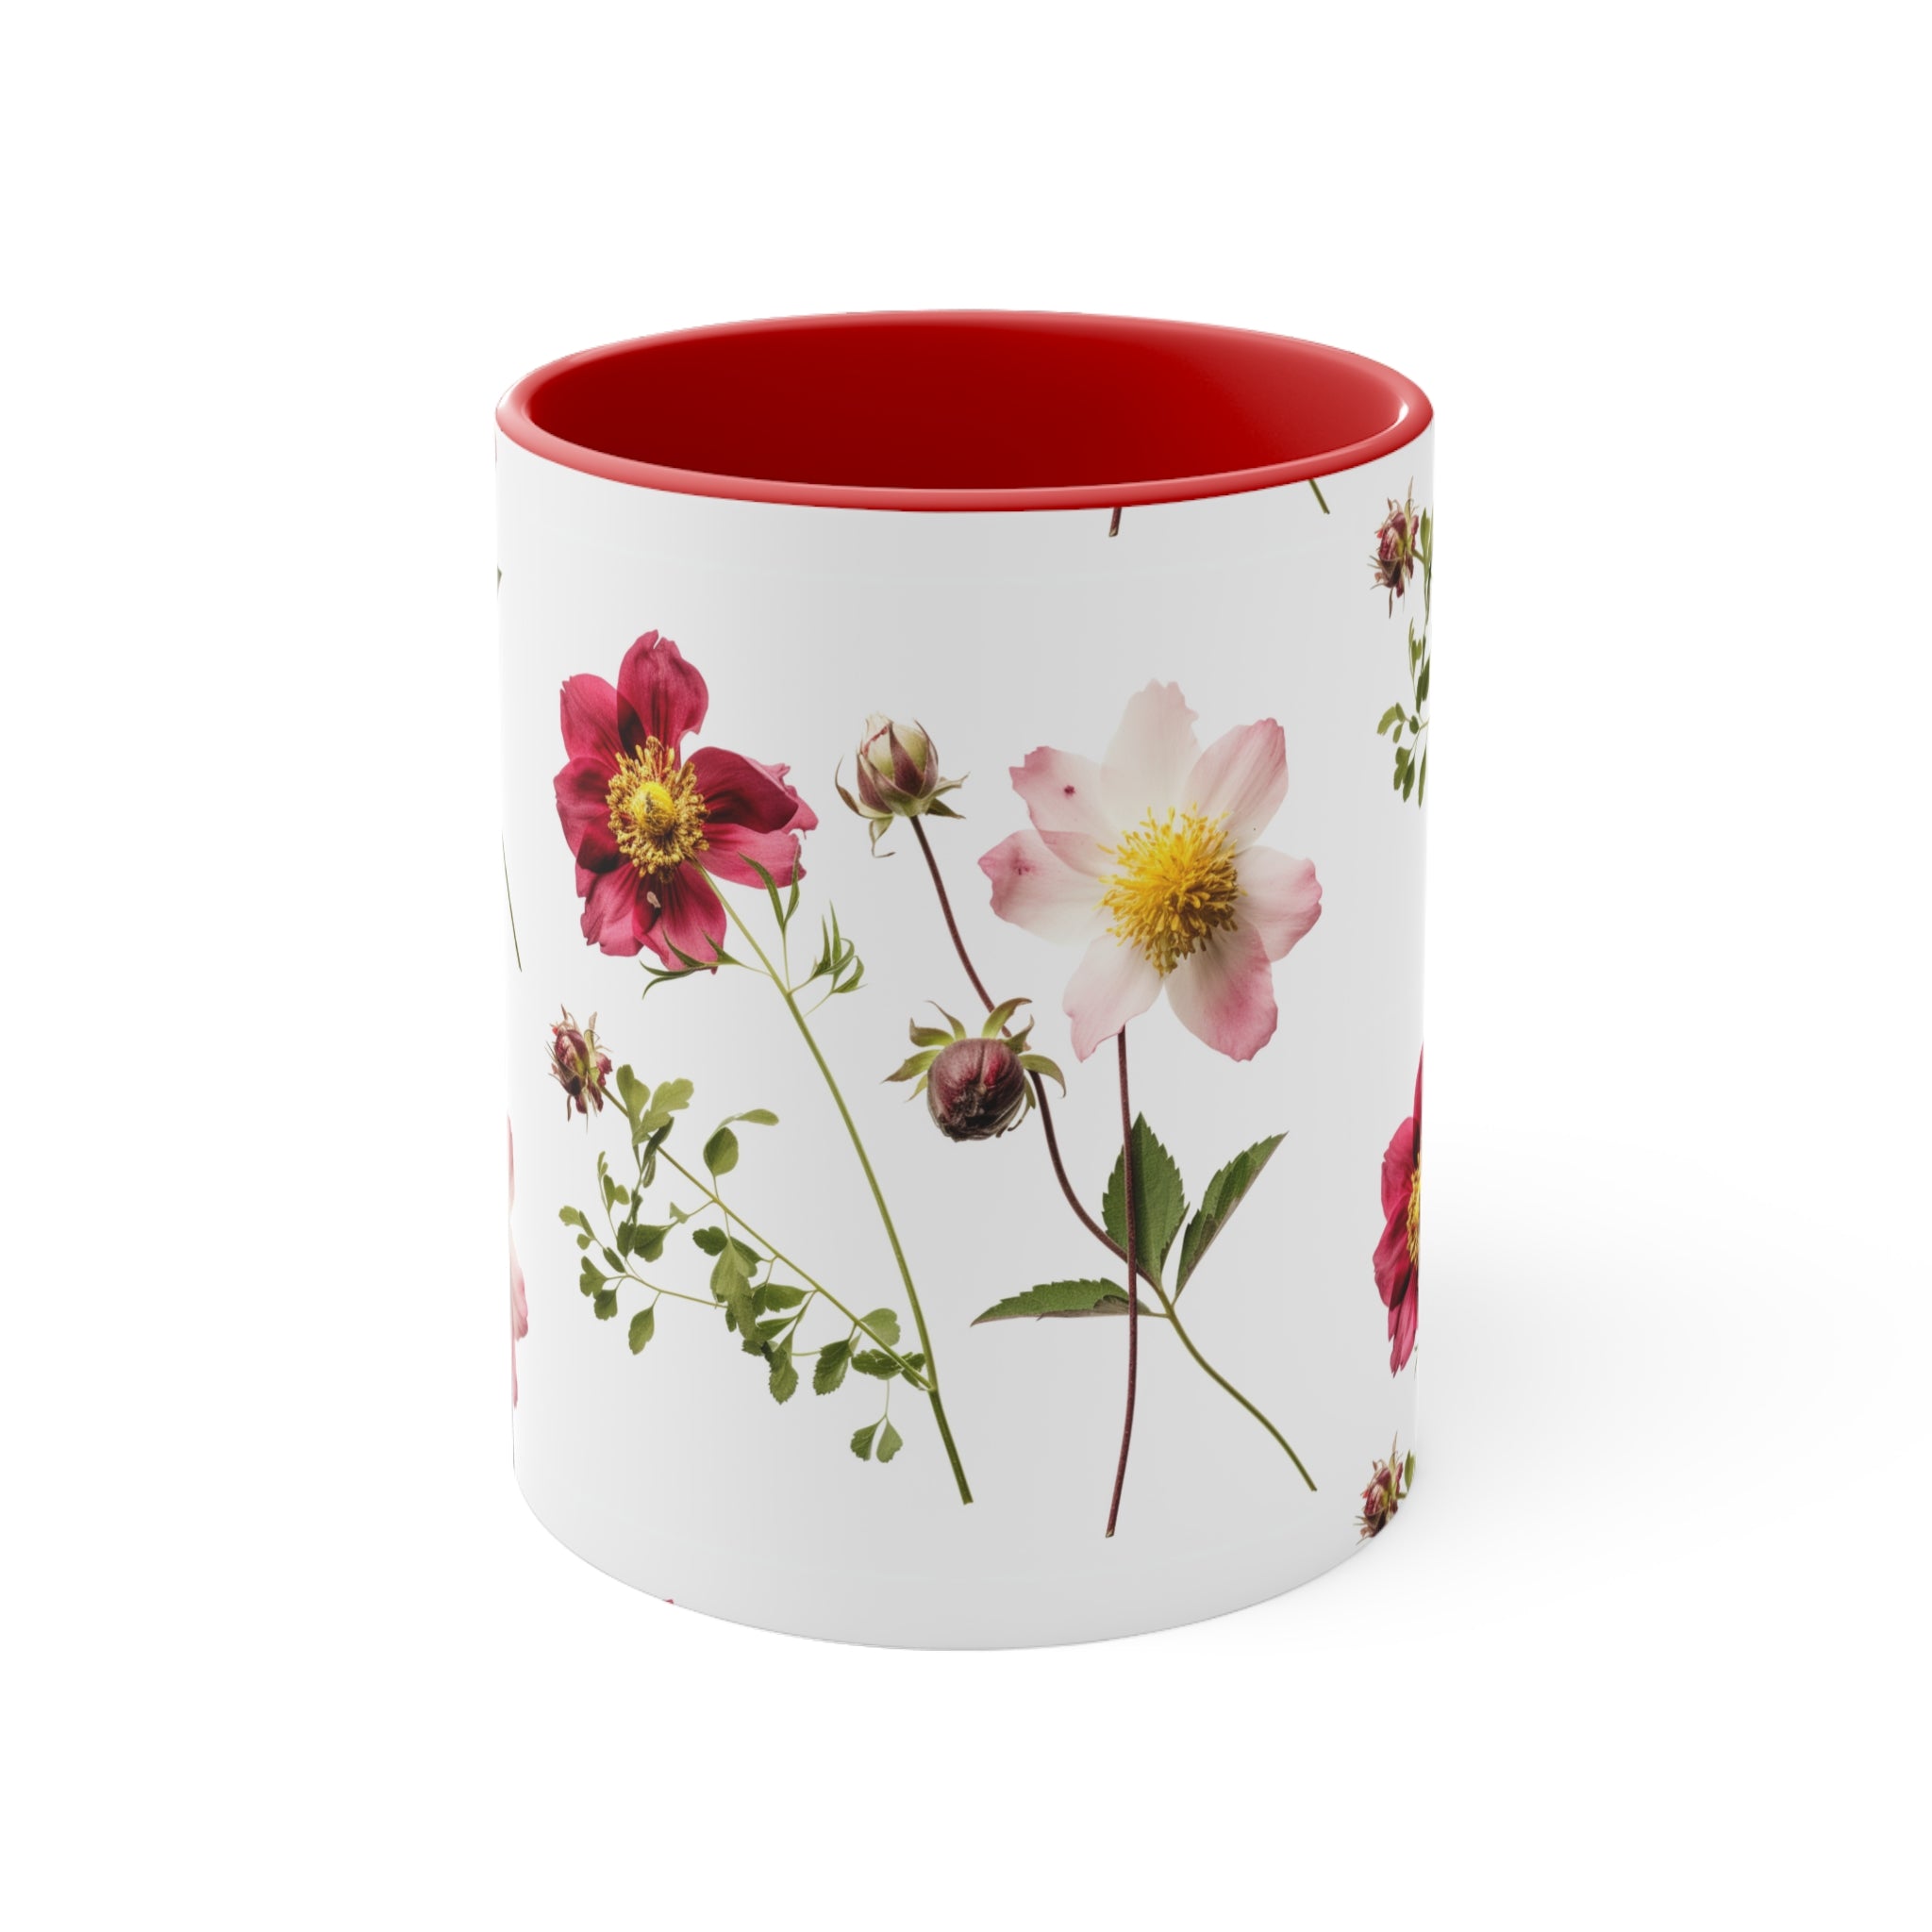 Cute Floral Coffee Mug Coffee Cup With Beautiful Photorealistic Flowers for Hot Starbucks Coffee